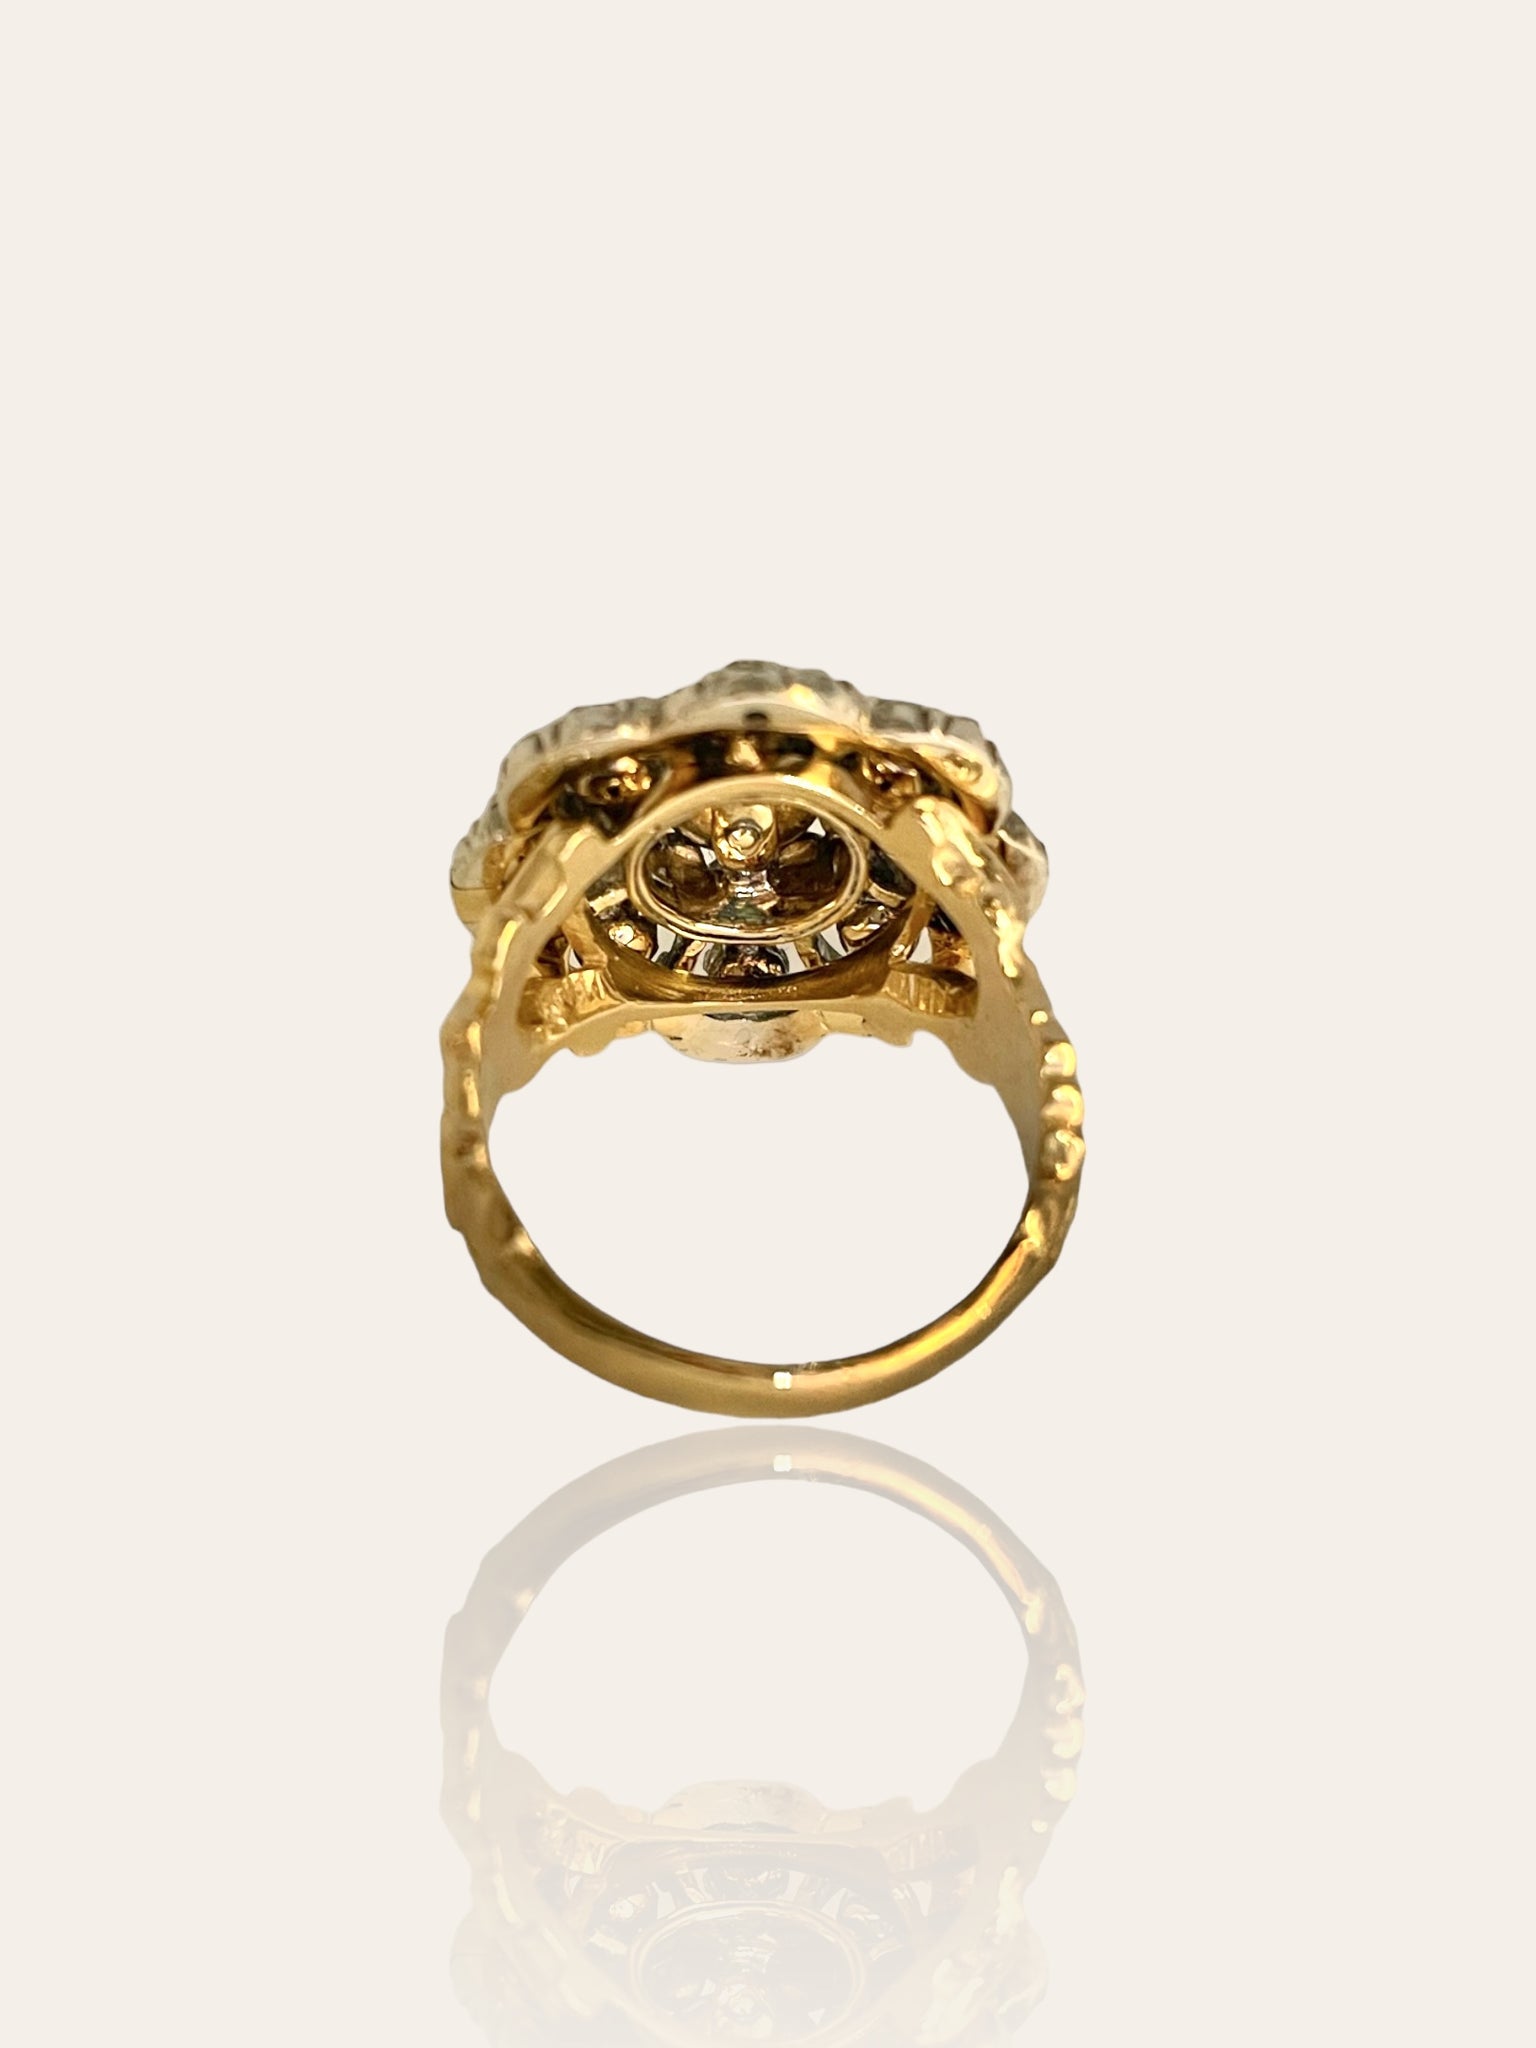 Antique ring with rose cut diamonds